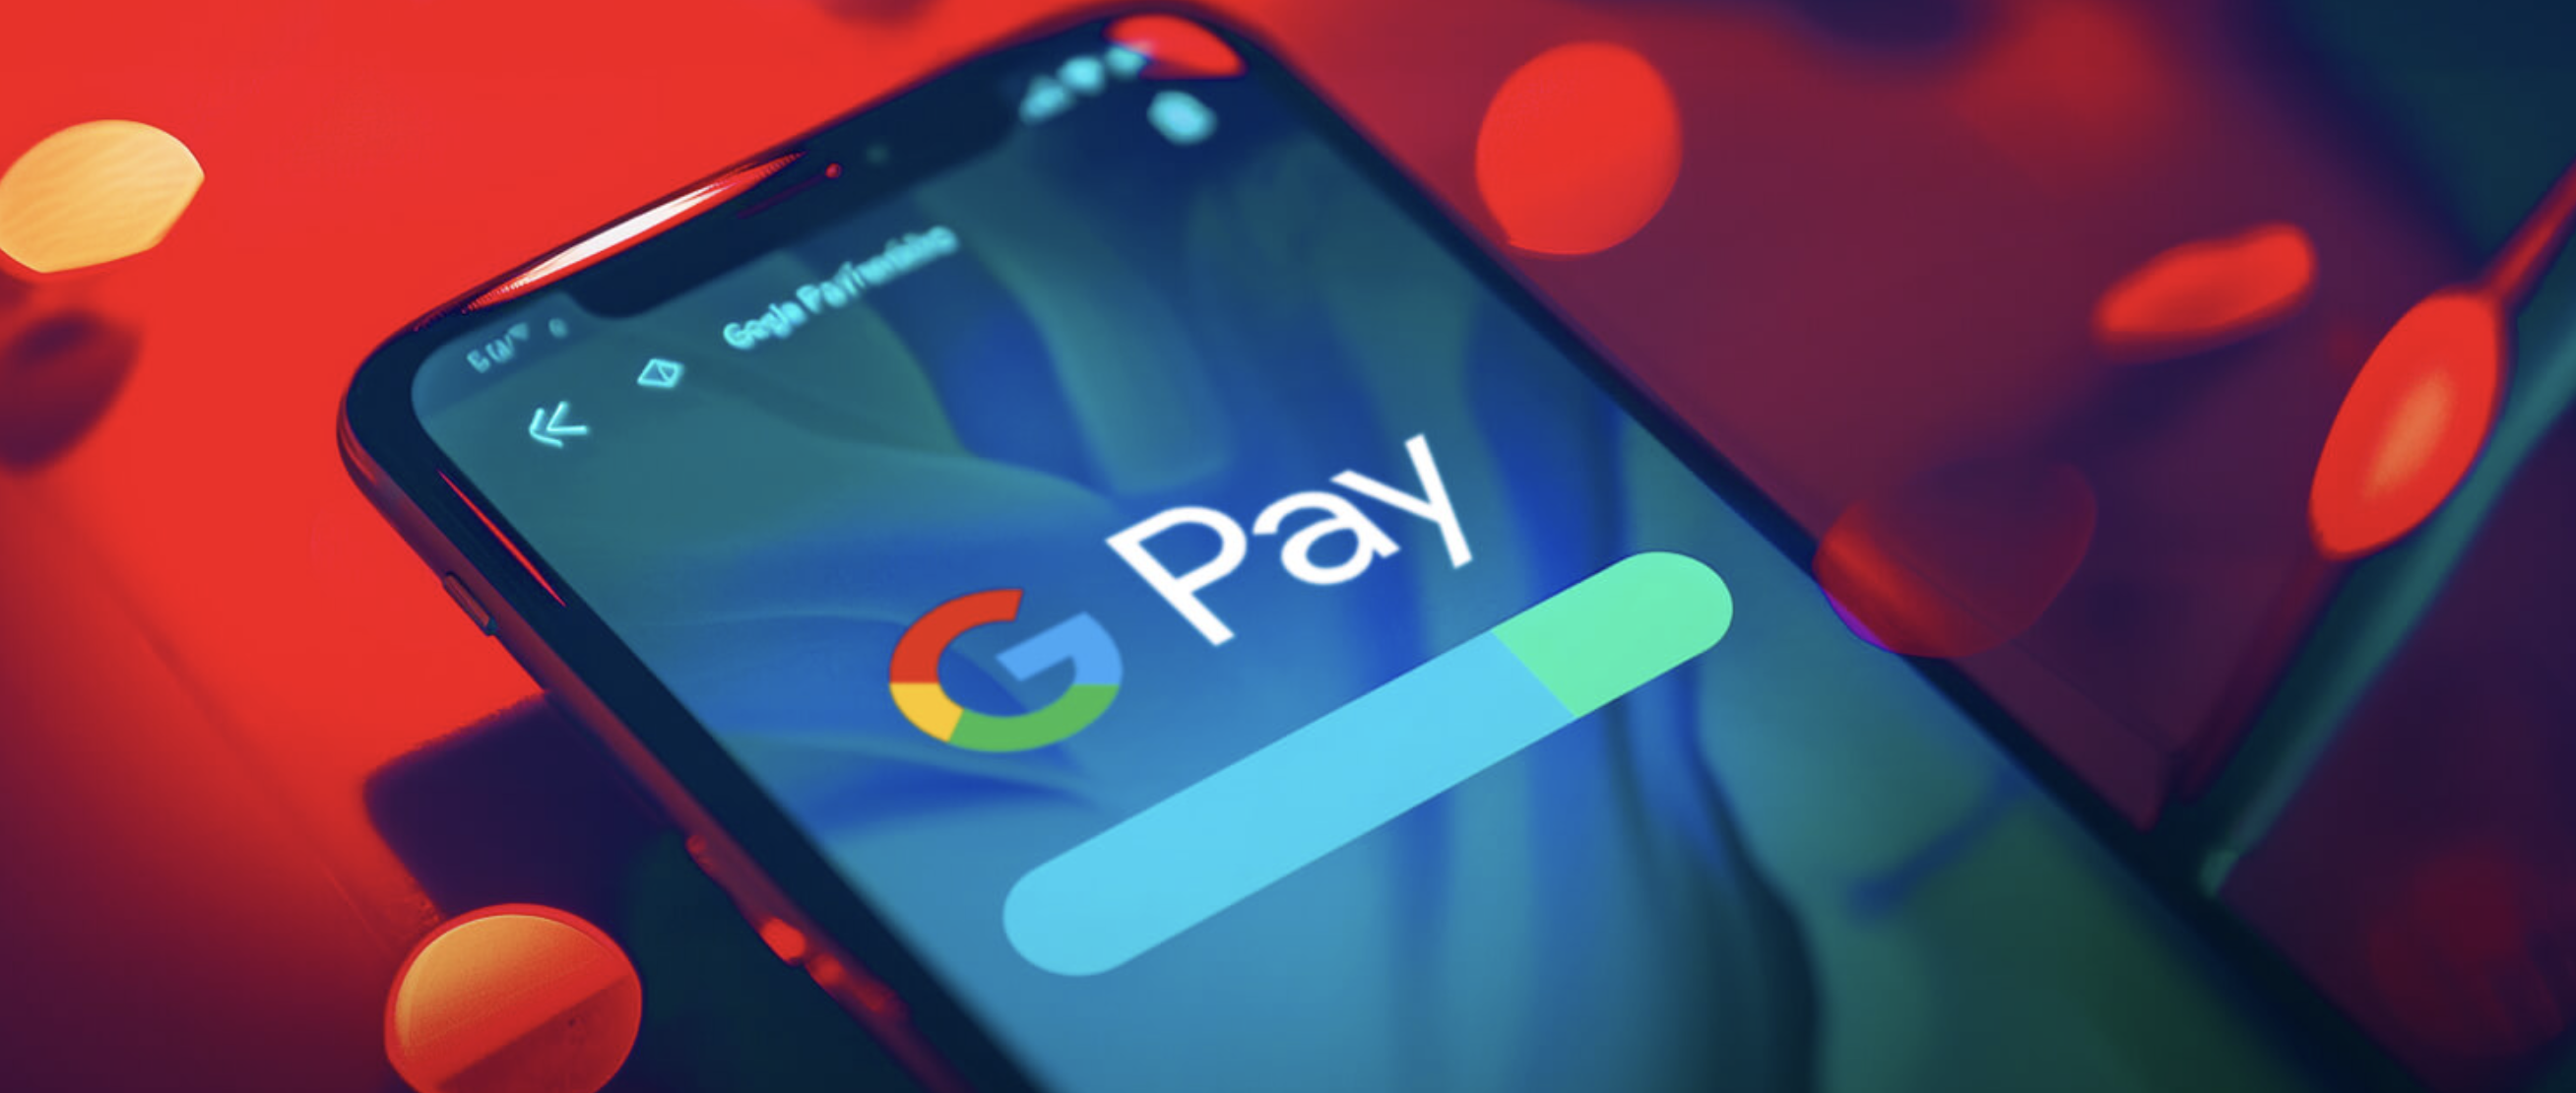 Google Pay Shuts Down In USA; No Change In India